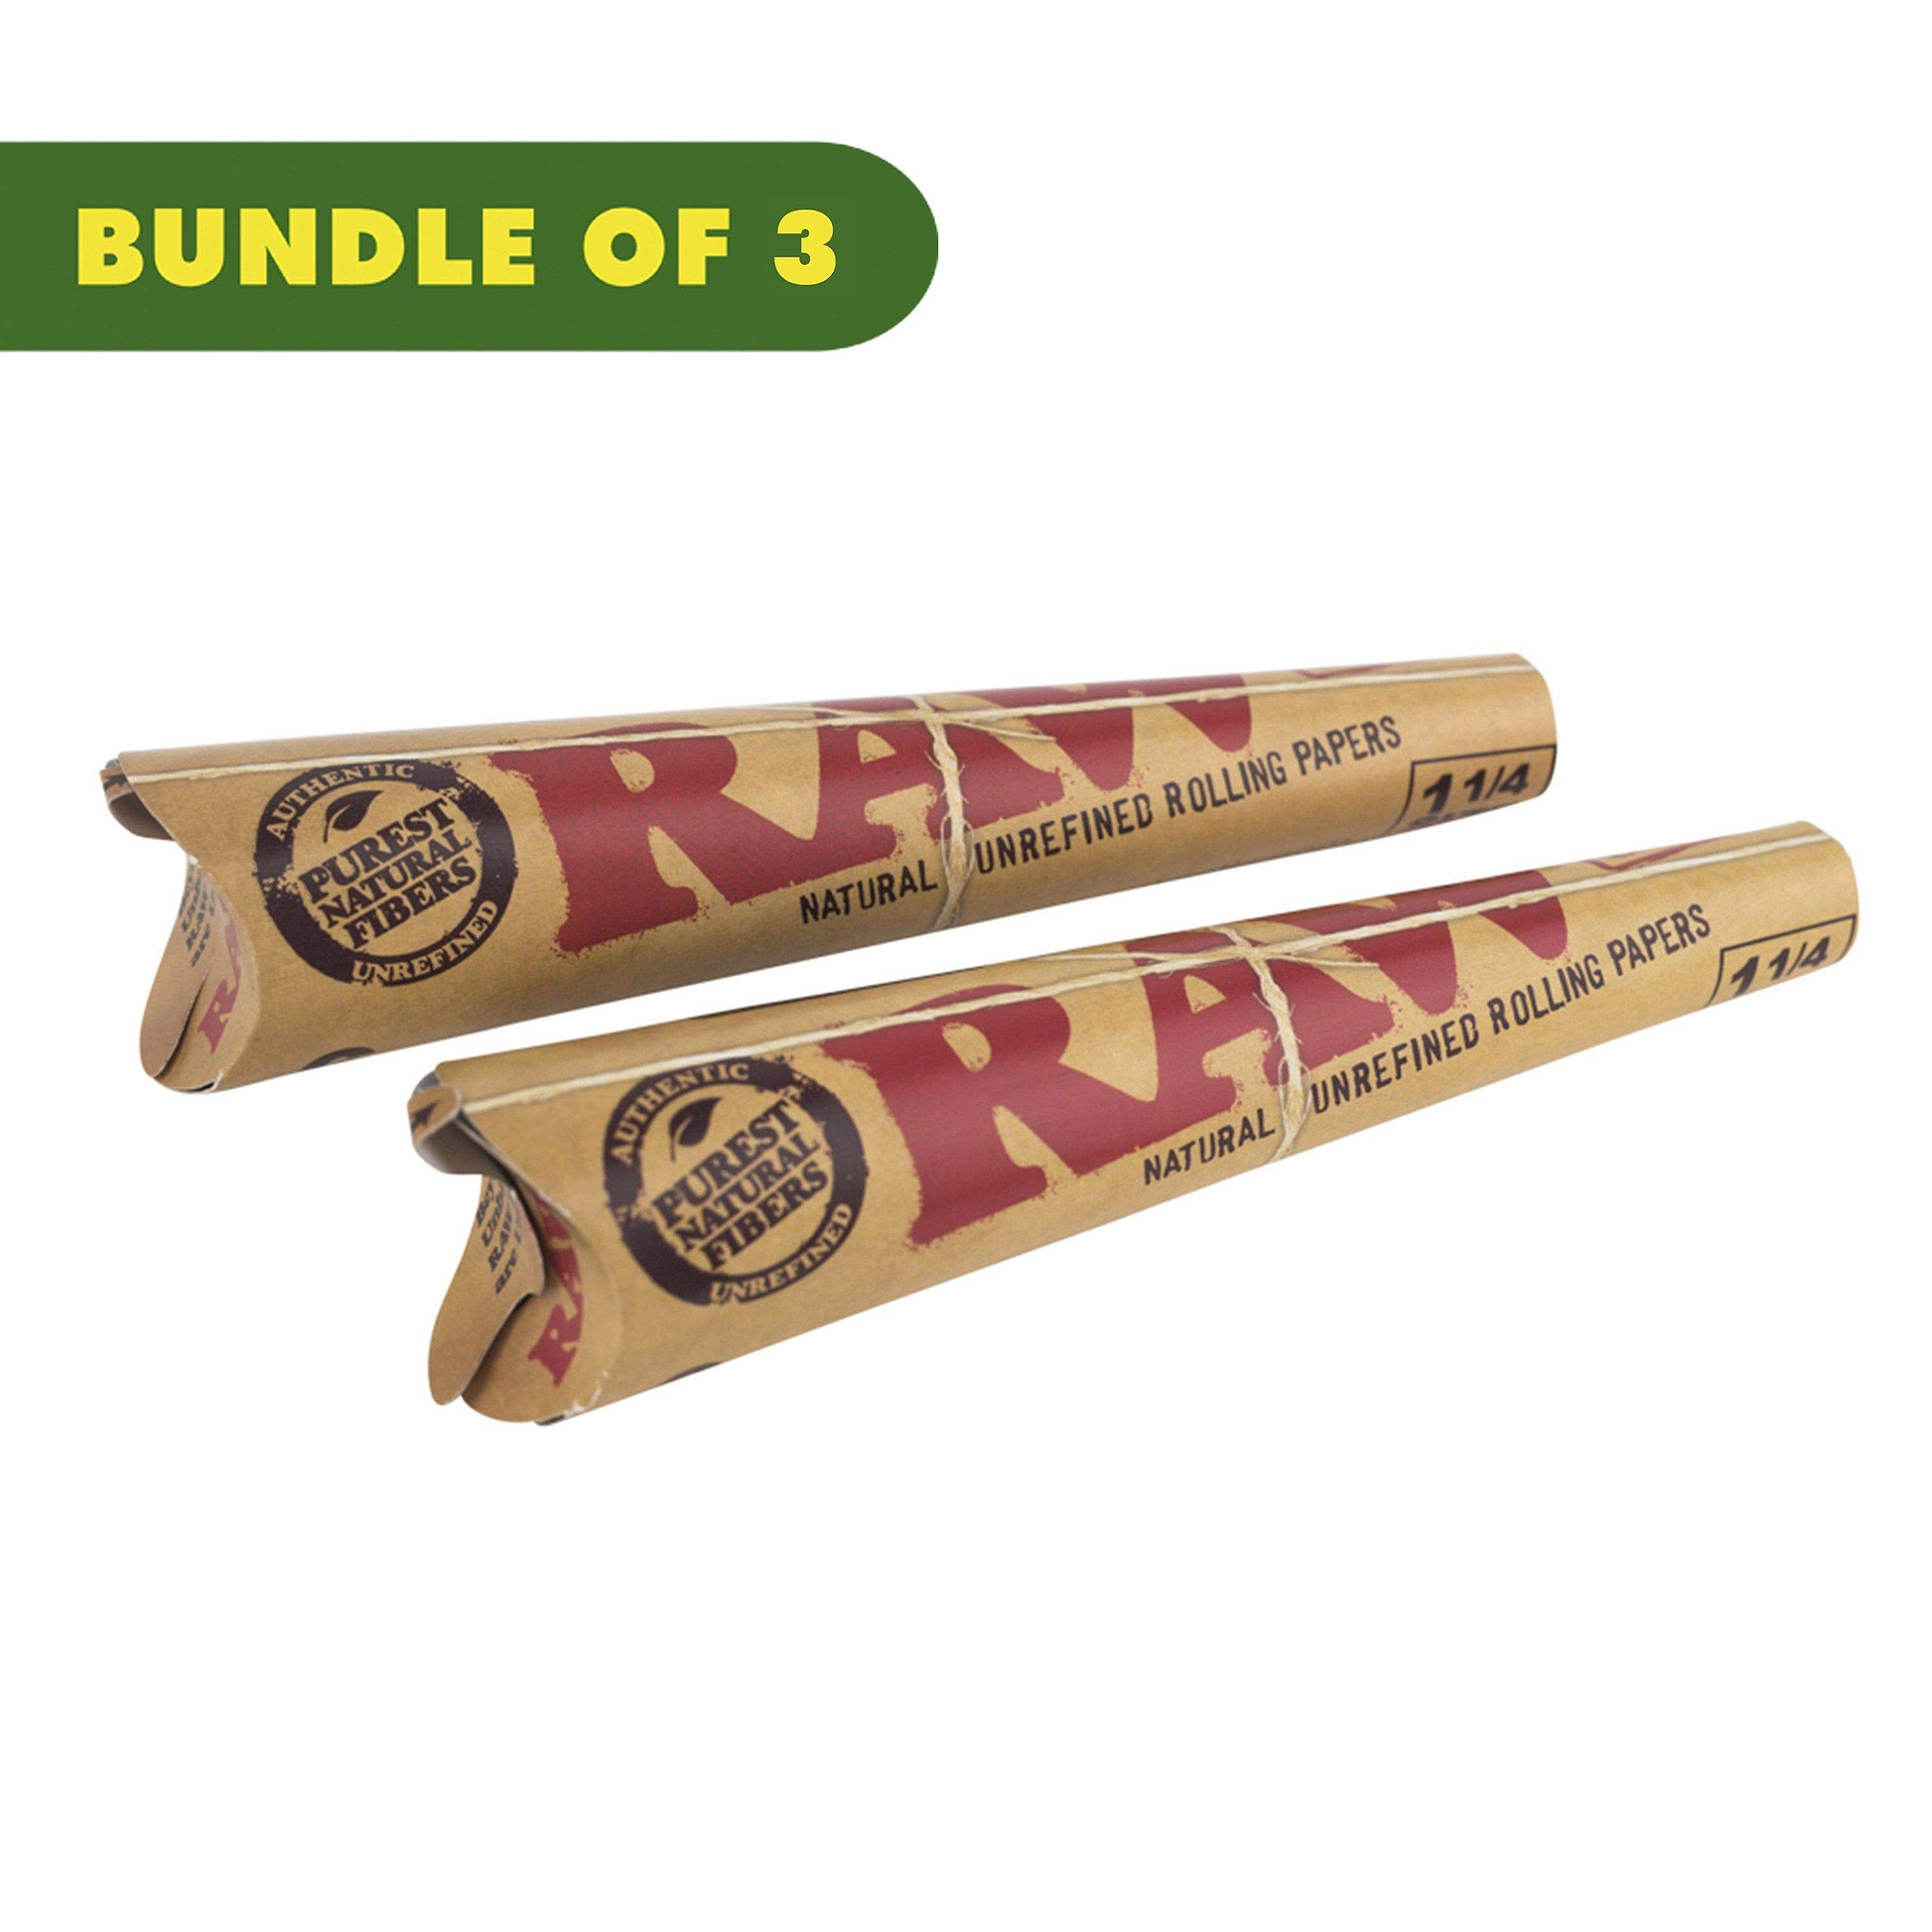 Easy-to-use pre-rolled classic RAW cone papers 1 ¼ wide in a unique cone shape and wooden rustic style